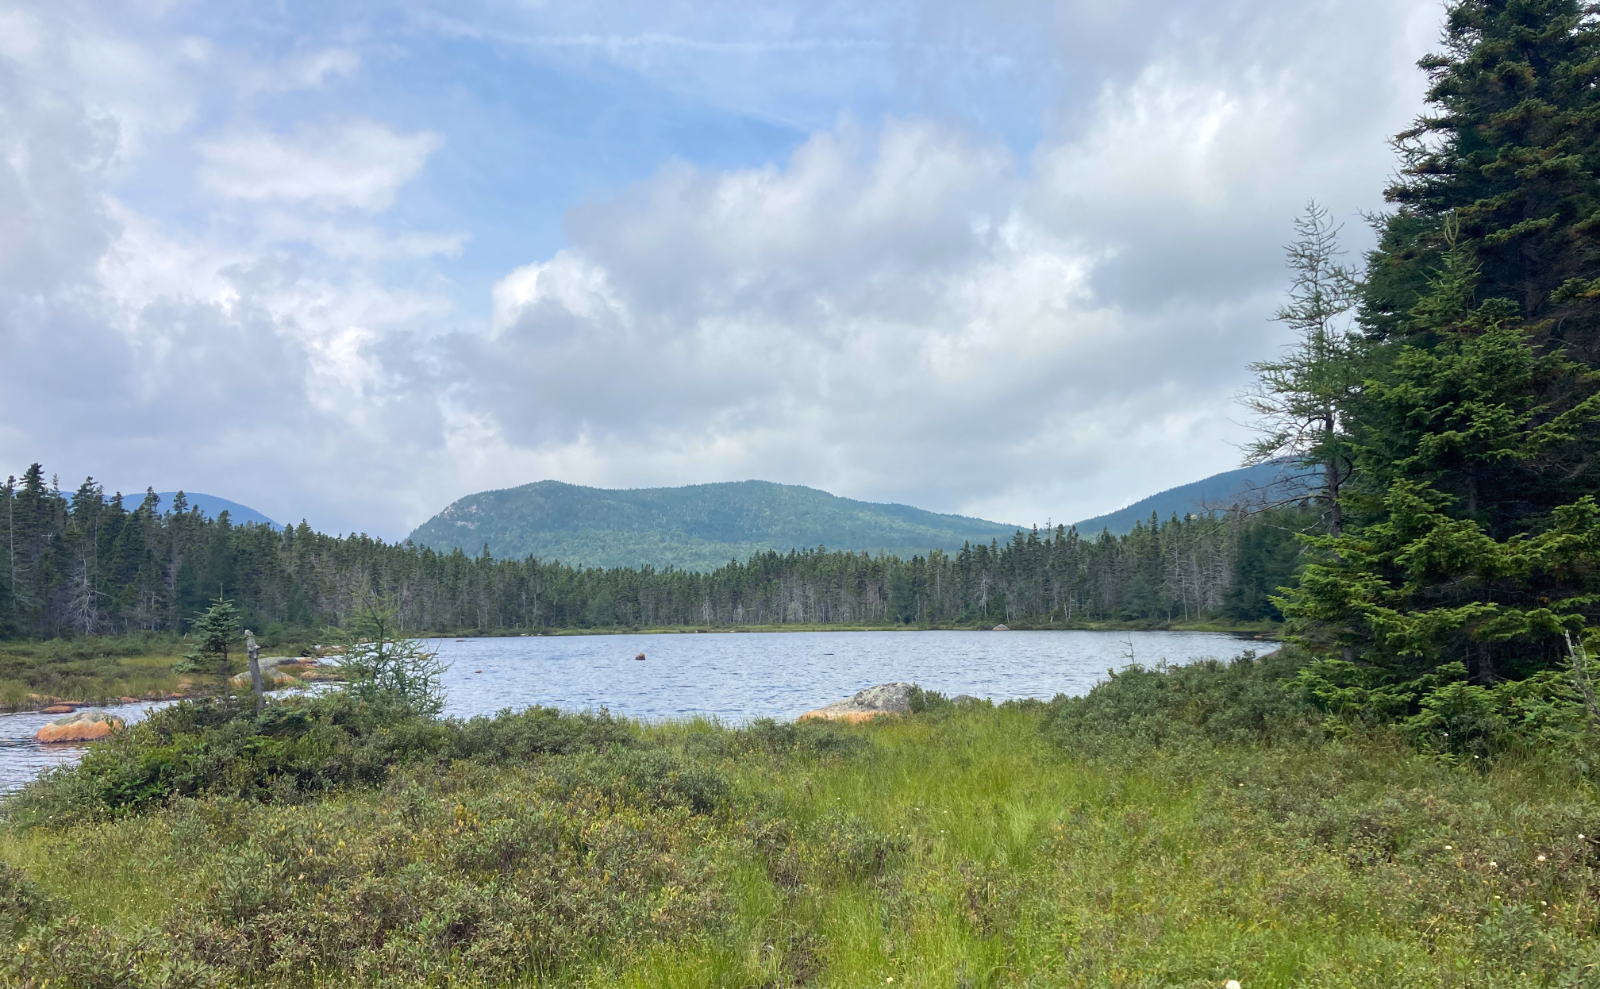 Shoal Pond, with a view of Zealand Notch. Pemigewasset Wilderness, east side, White Mountains, New Hampshire.